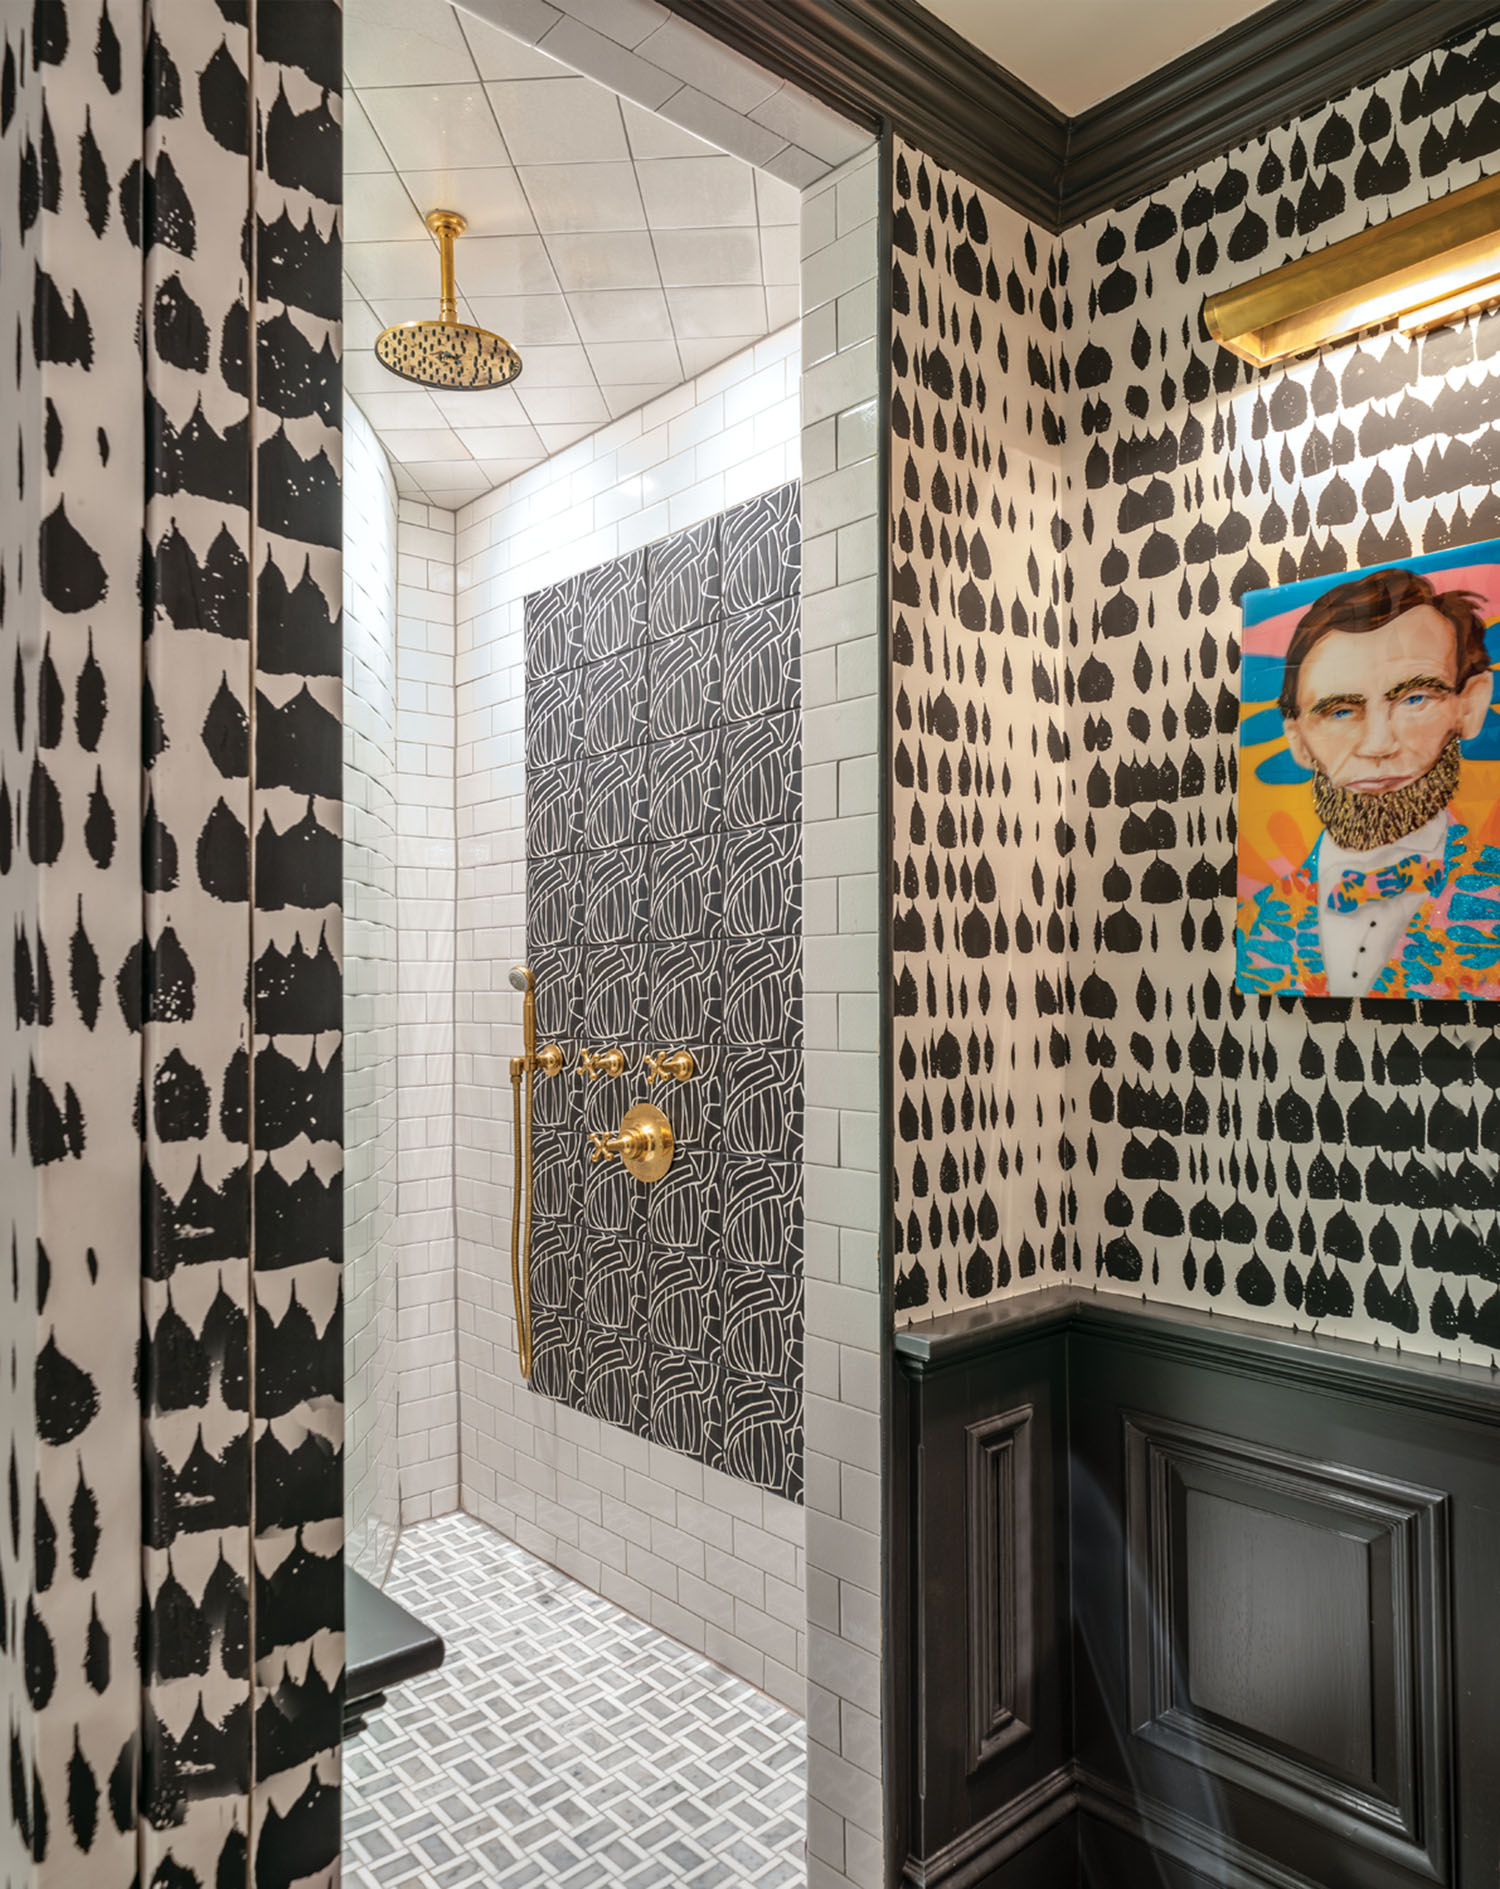 Graphic black and white wallpaper outside the tile shower of a bathroom designed by Liz Caan.